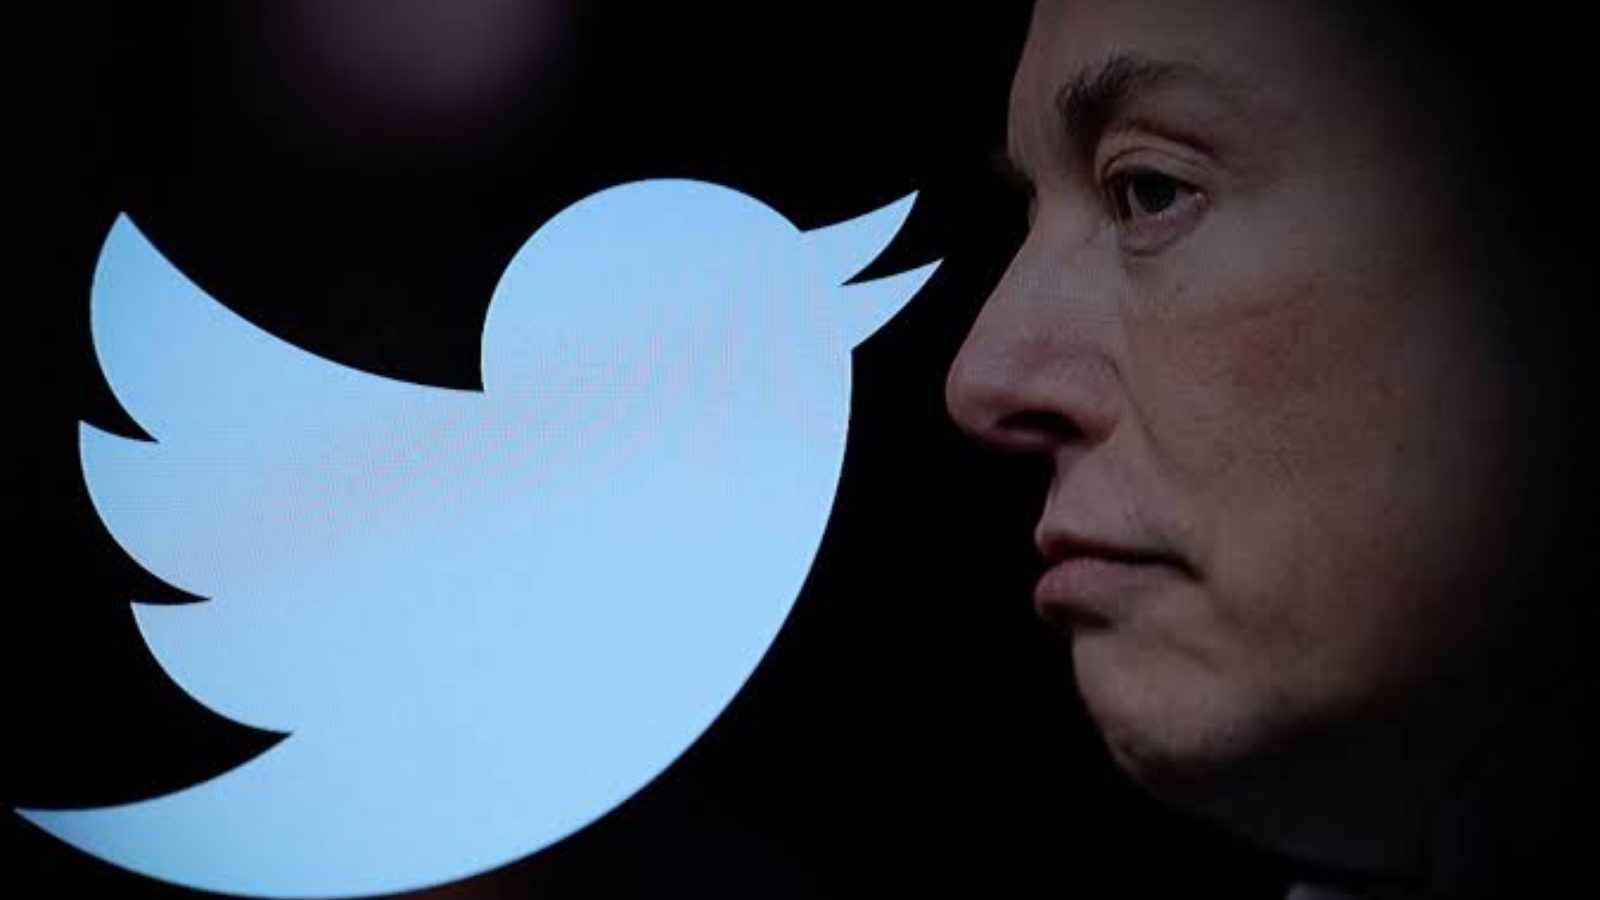 Elon Musk issues new Twitter guidelines for parody and fan accounts.